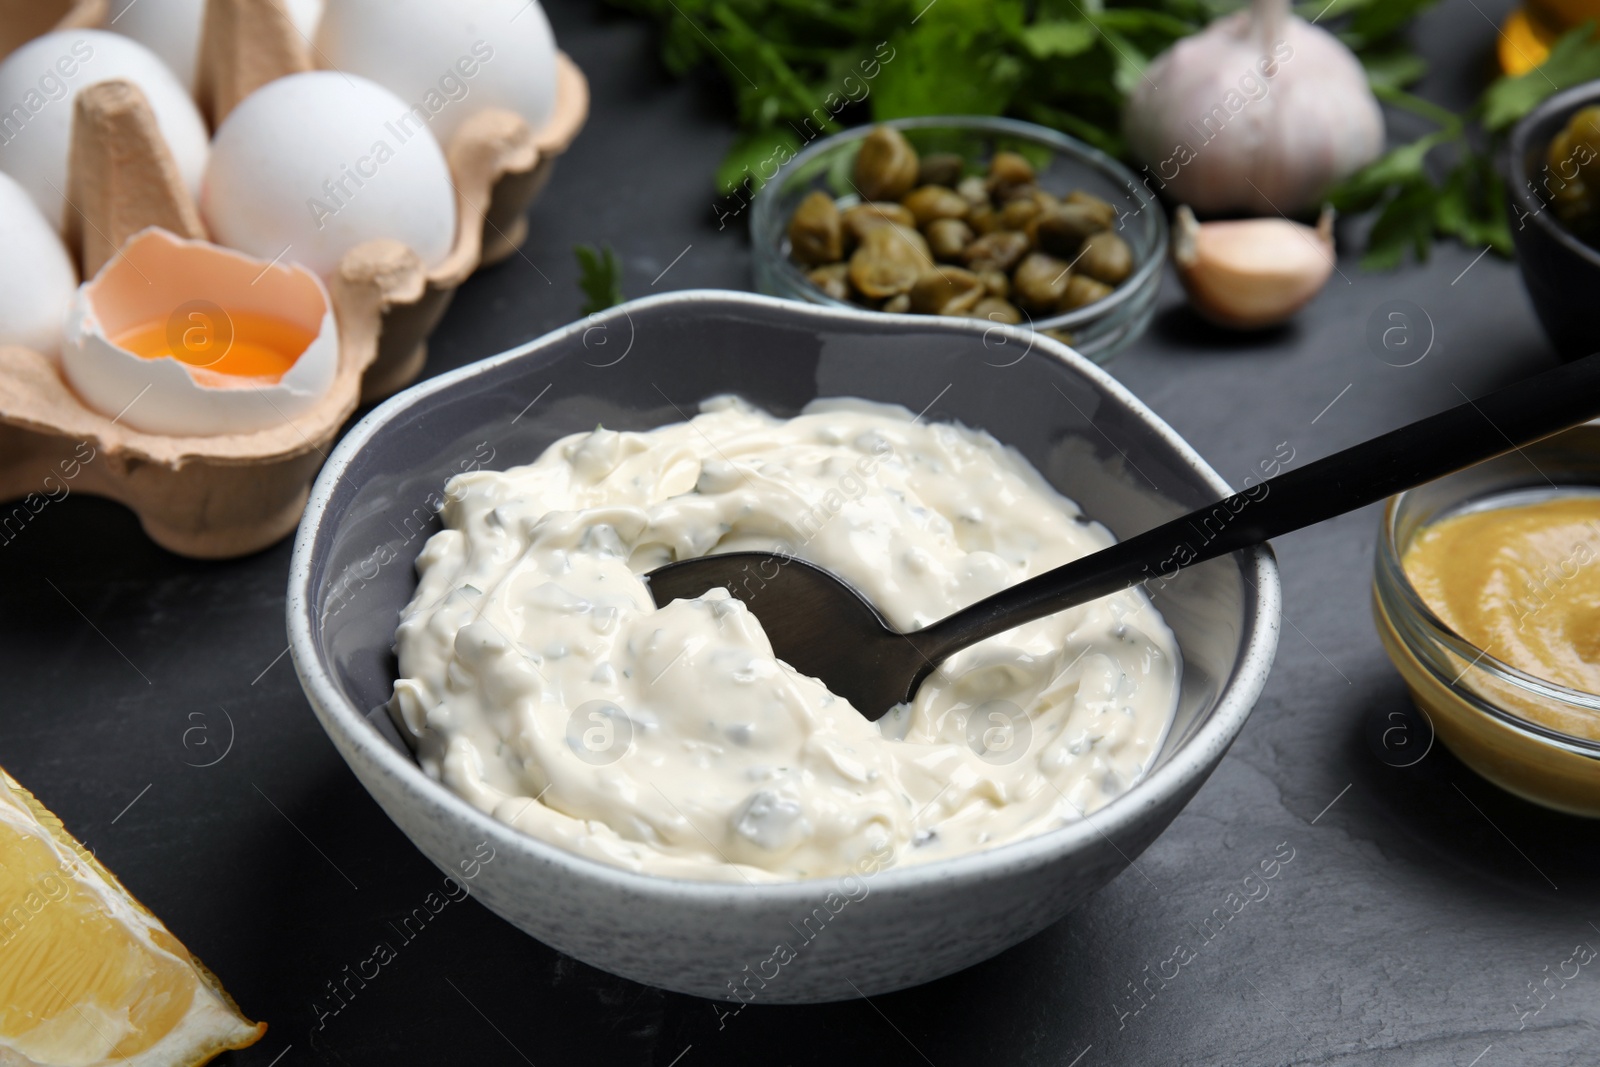 Photo of Tasty tartar sauce and ingredients on black table